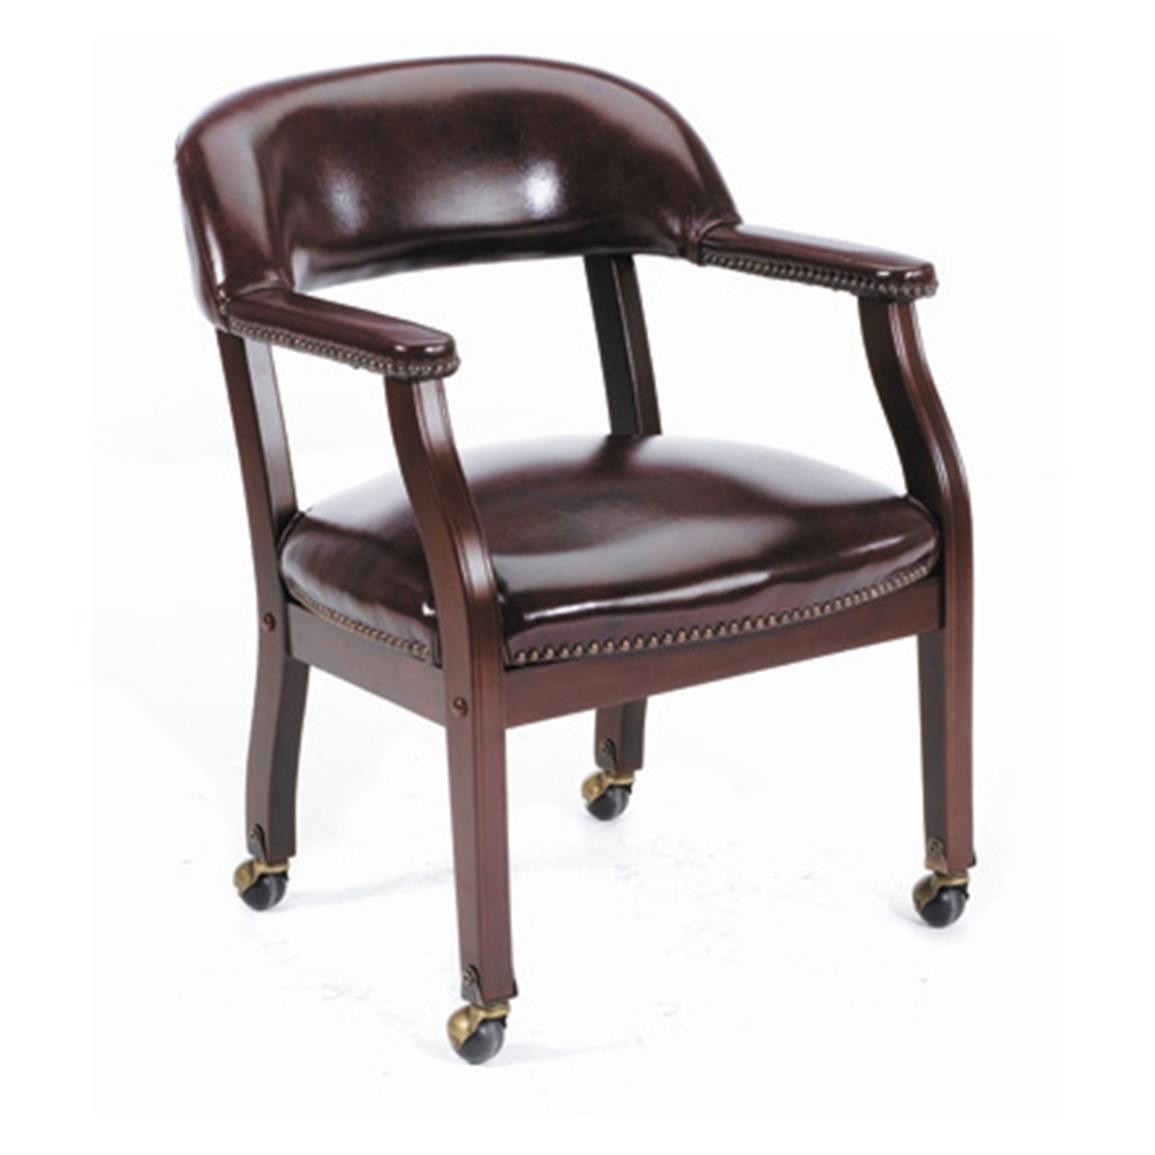 Boss chair b9545 guest chair with casters mahogany frame black